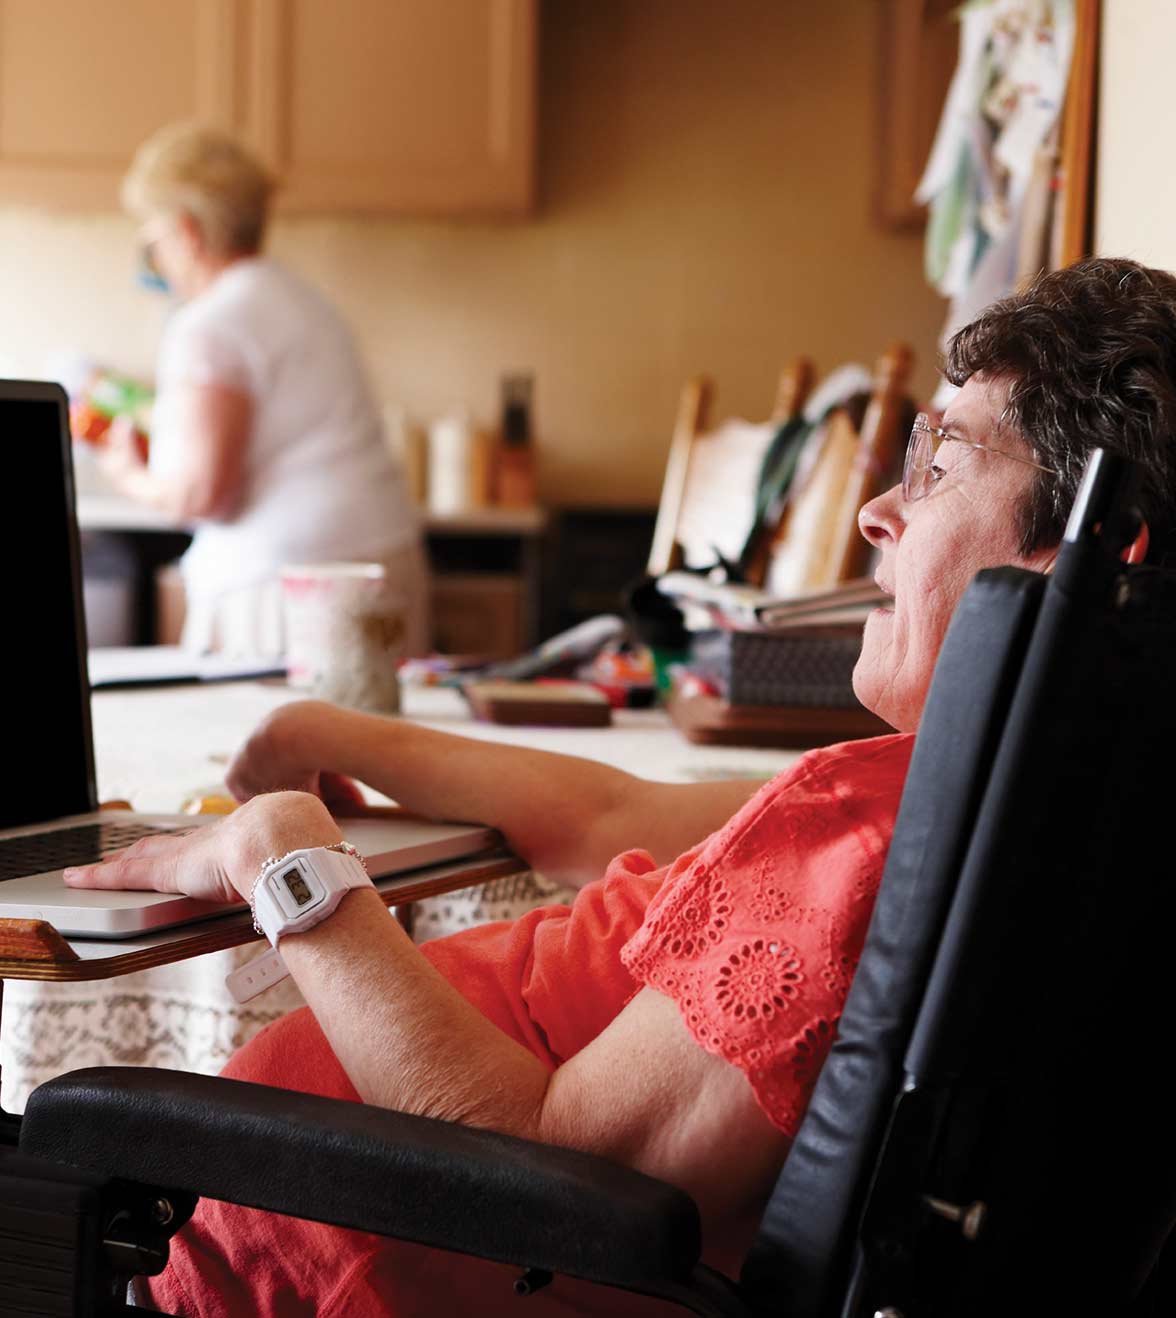 A woman in a wheelchair sits at her computer, while her caregiver makes food in the kitchen